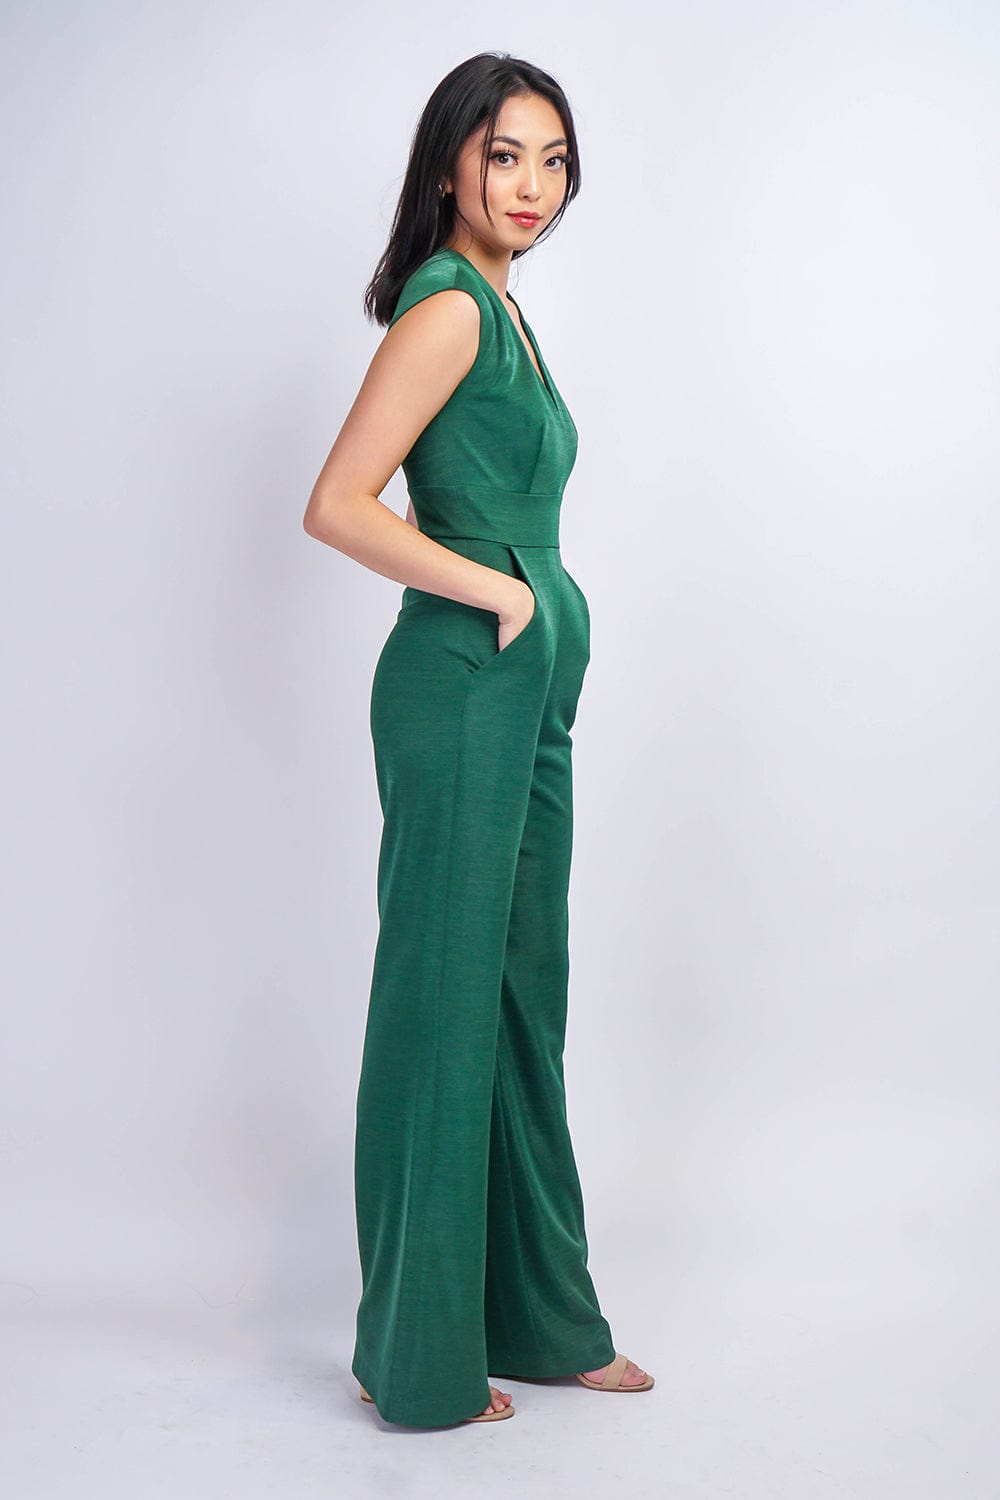 JUMPSUITS & ROMPERS Emerald Luxe Sheen V Neck Aiden Jumpsuit - Chloe Dao